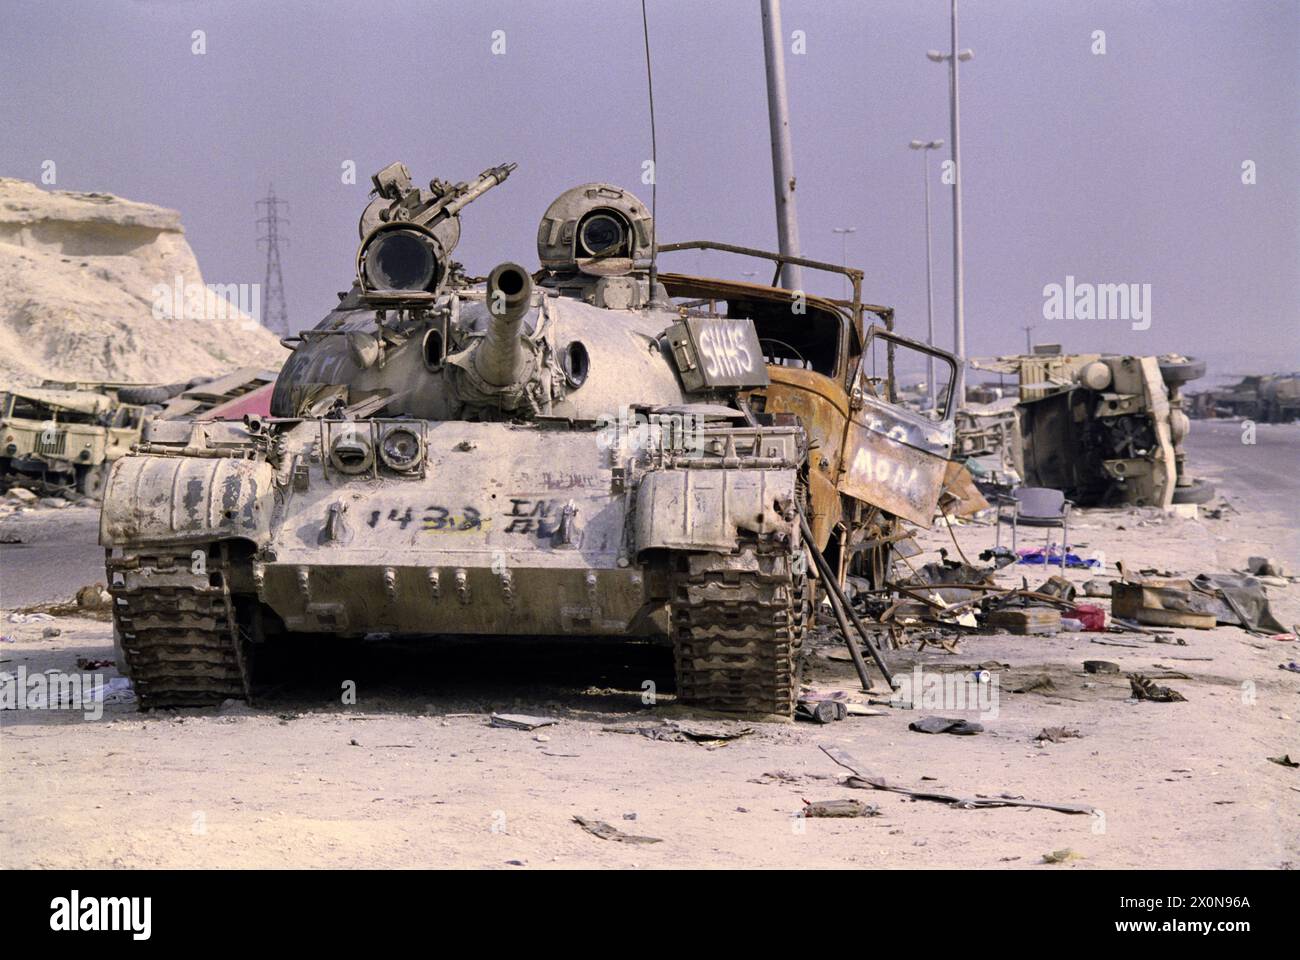 1st April 1991 An abandoned Iraqi T55 tank among the devastation on the “Highway of Death”, the main highway to Basra, west of Kuwait City. Stock Photo